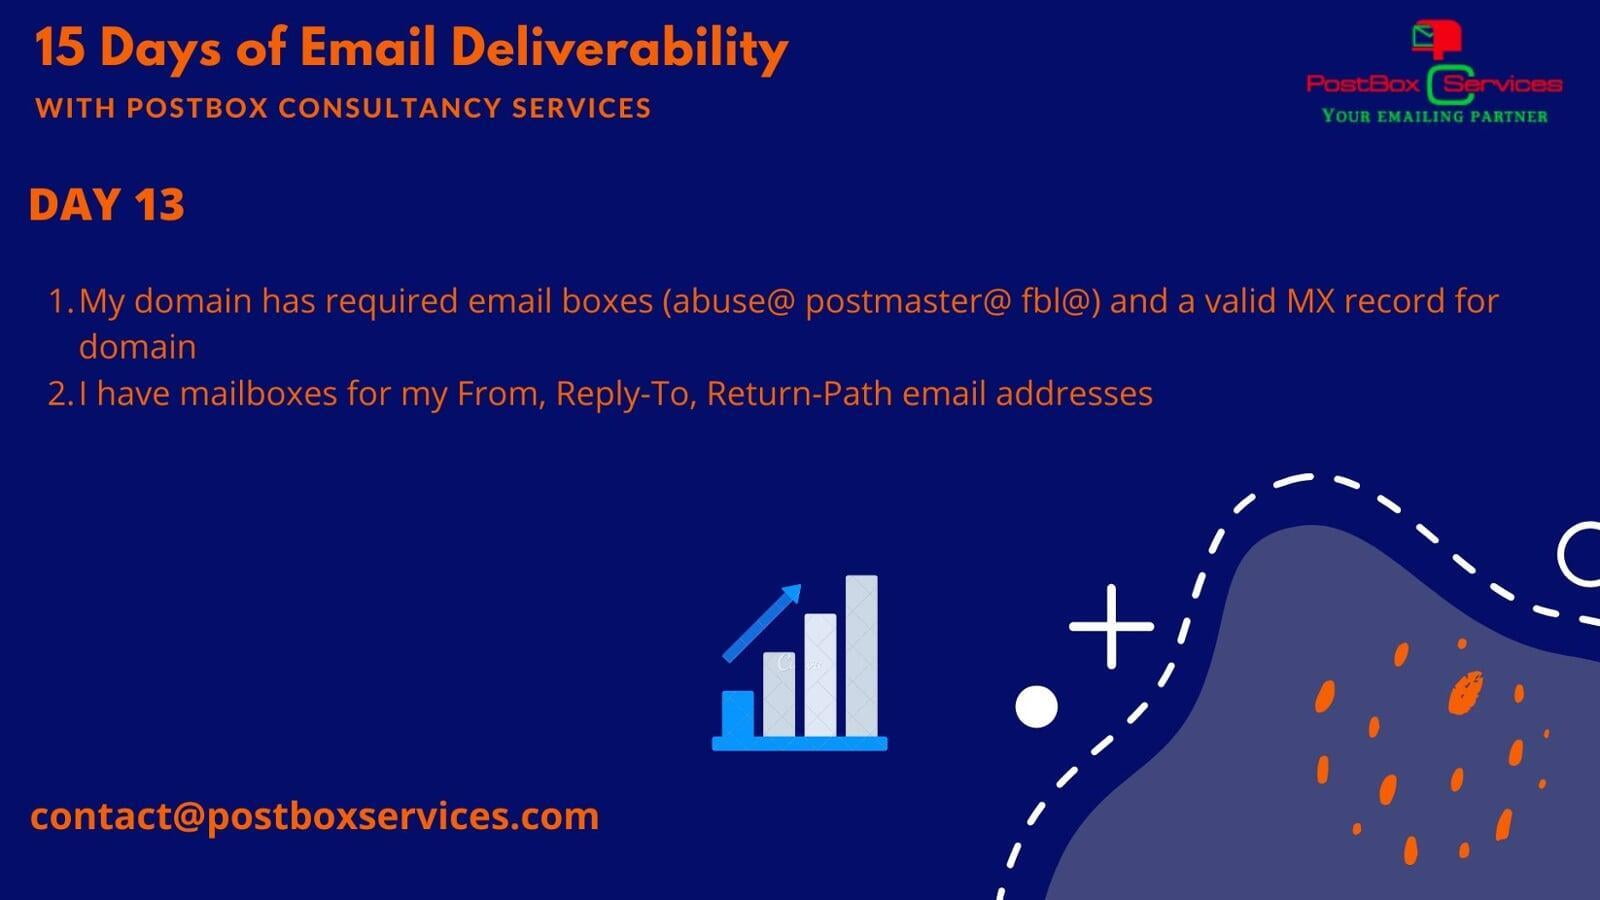 Day 13 Email Deliverability